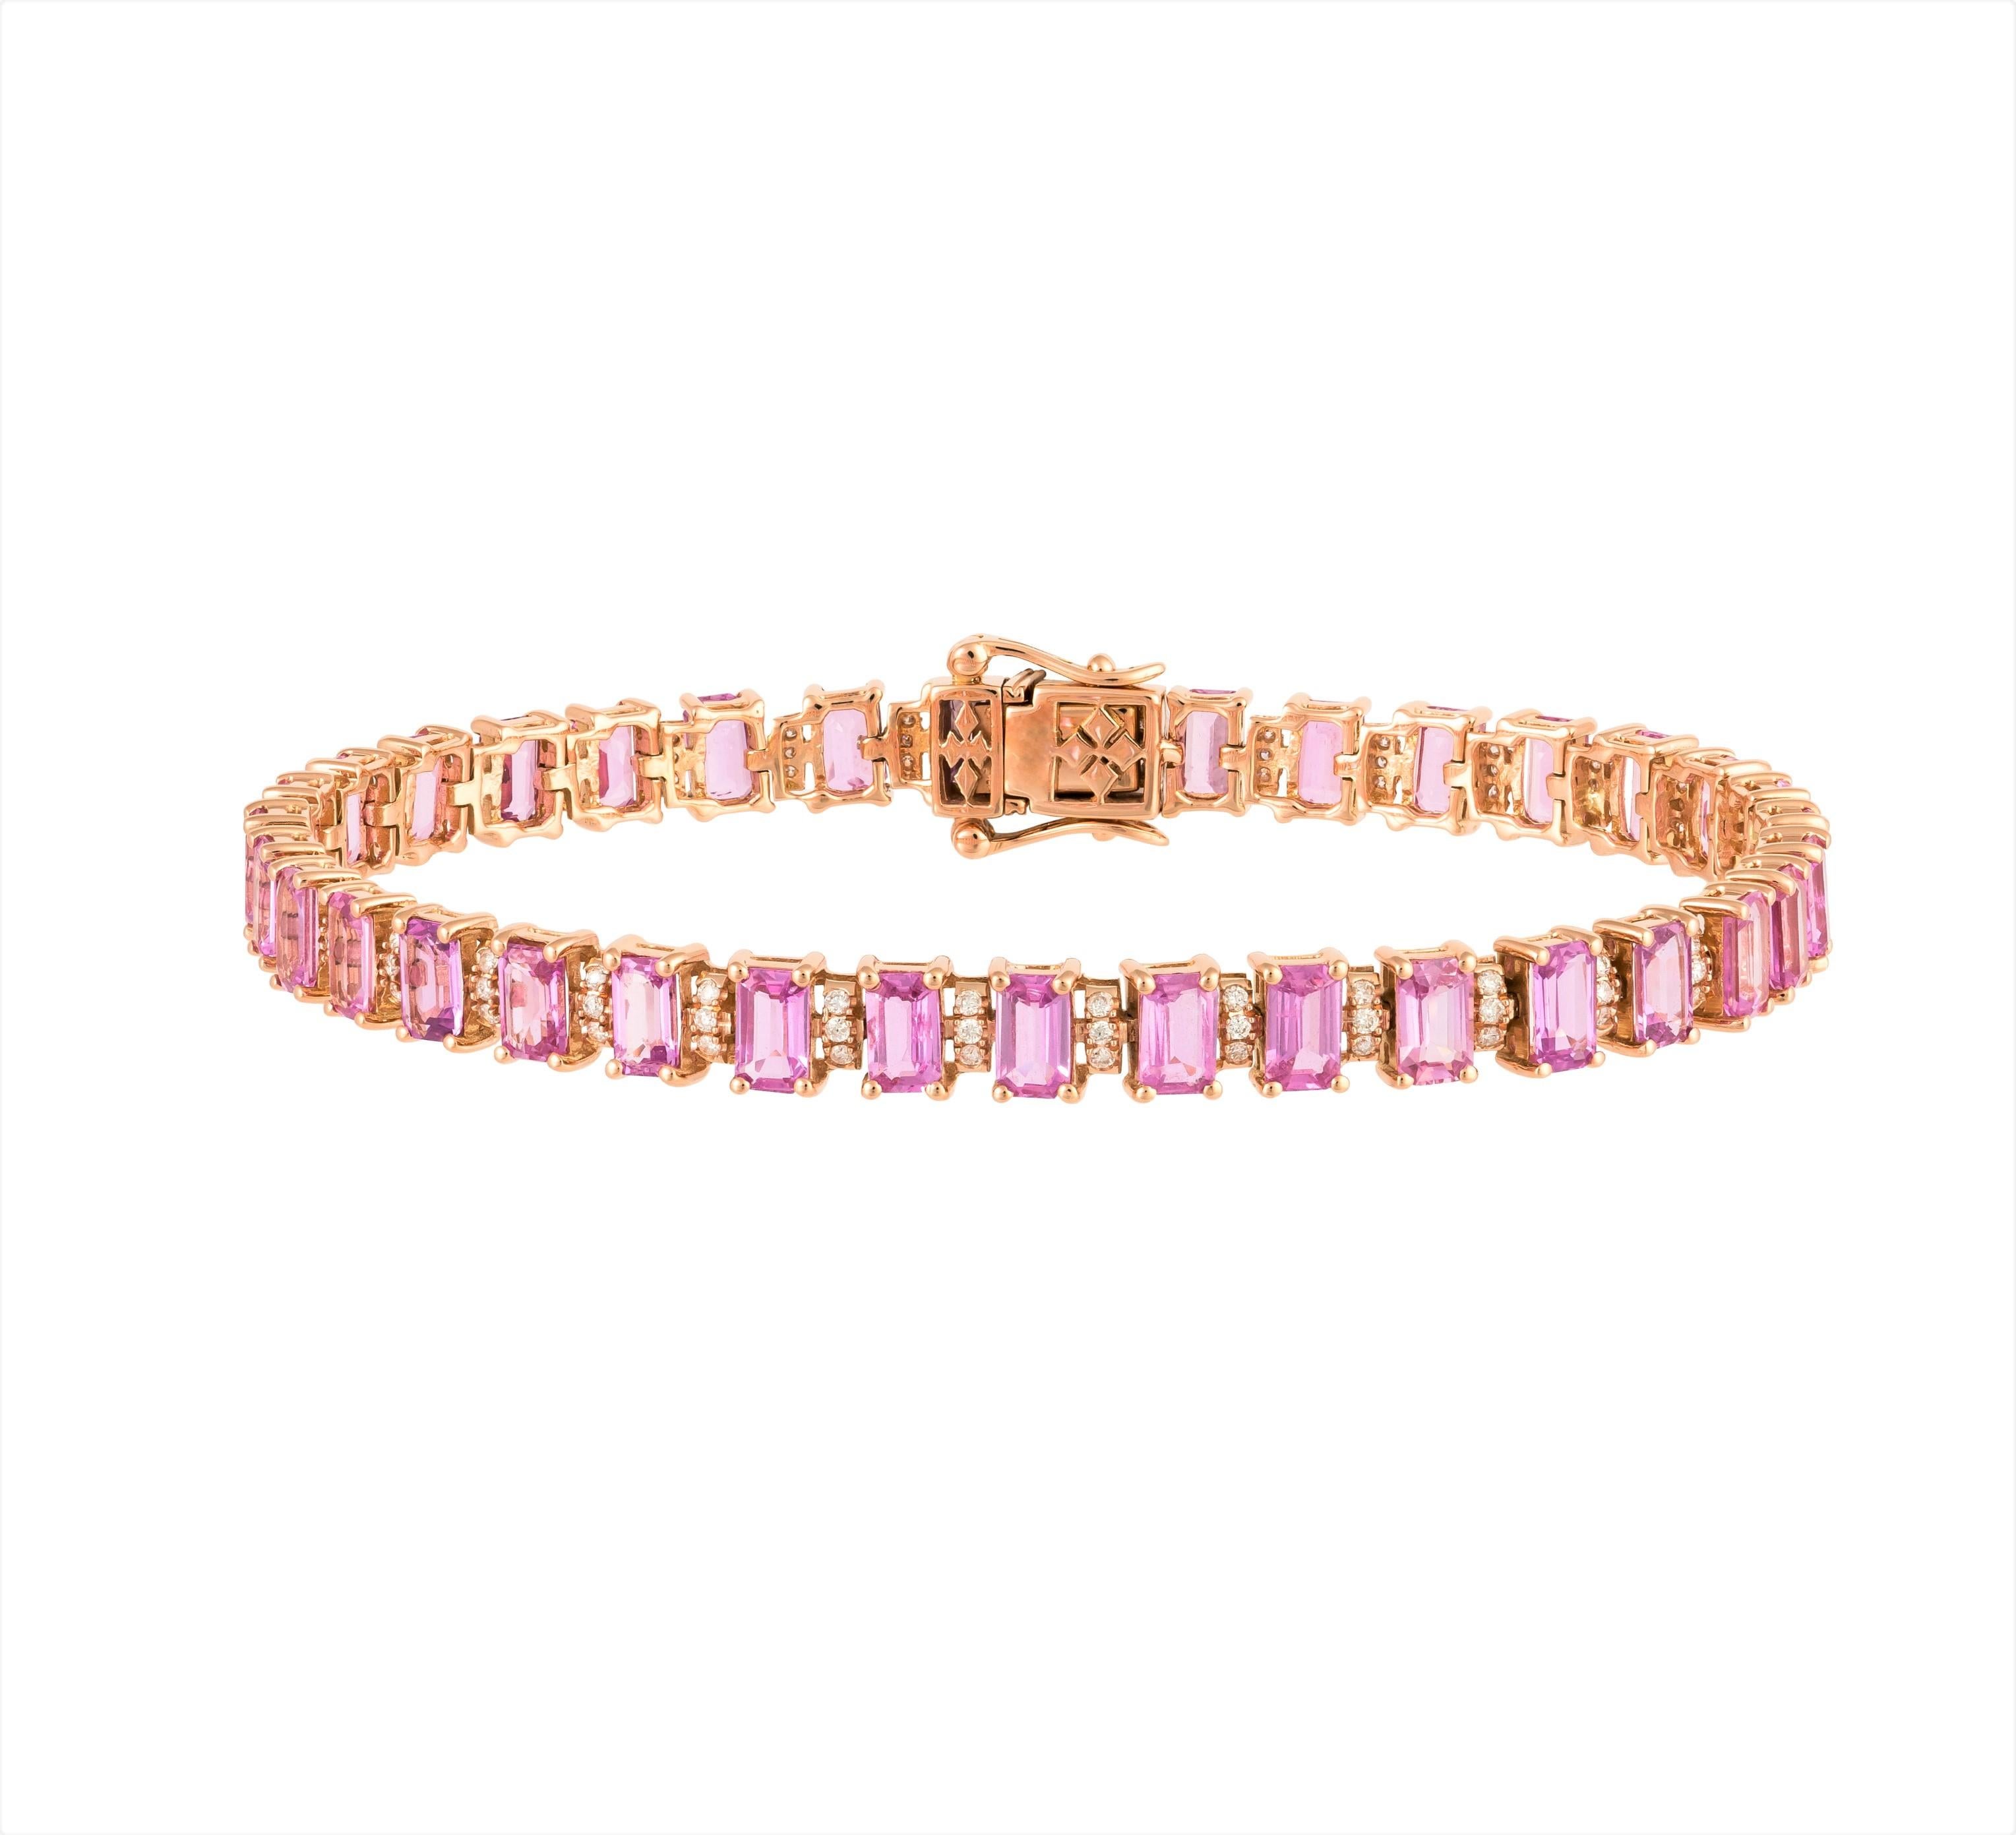 The Following Item we are offering is this Rare Important Radiant 18KT Gold Gorgeous Glittering and Sparkling Magnificent Fancy Emerald Cut Pink Sapphire and Diamond Bracelet. Bracelet contains approx 11.25CTS of Beautiful Fancy Emerald Cut Pink